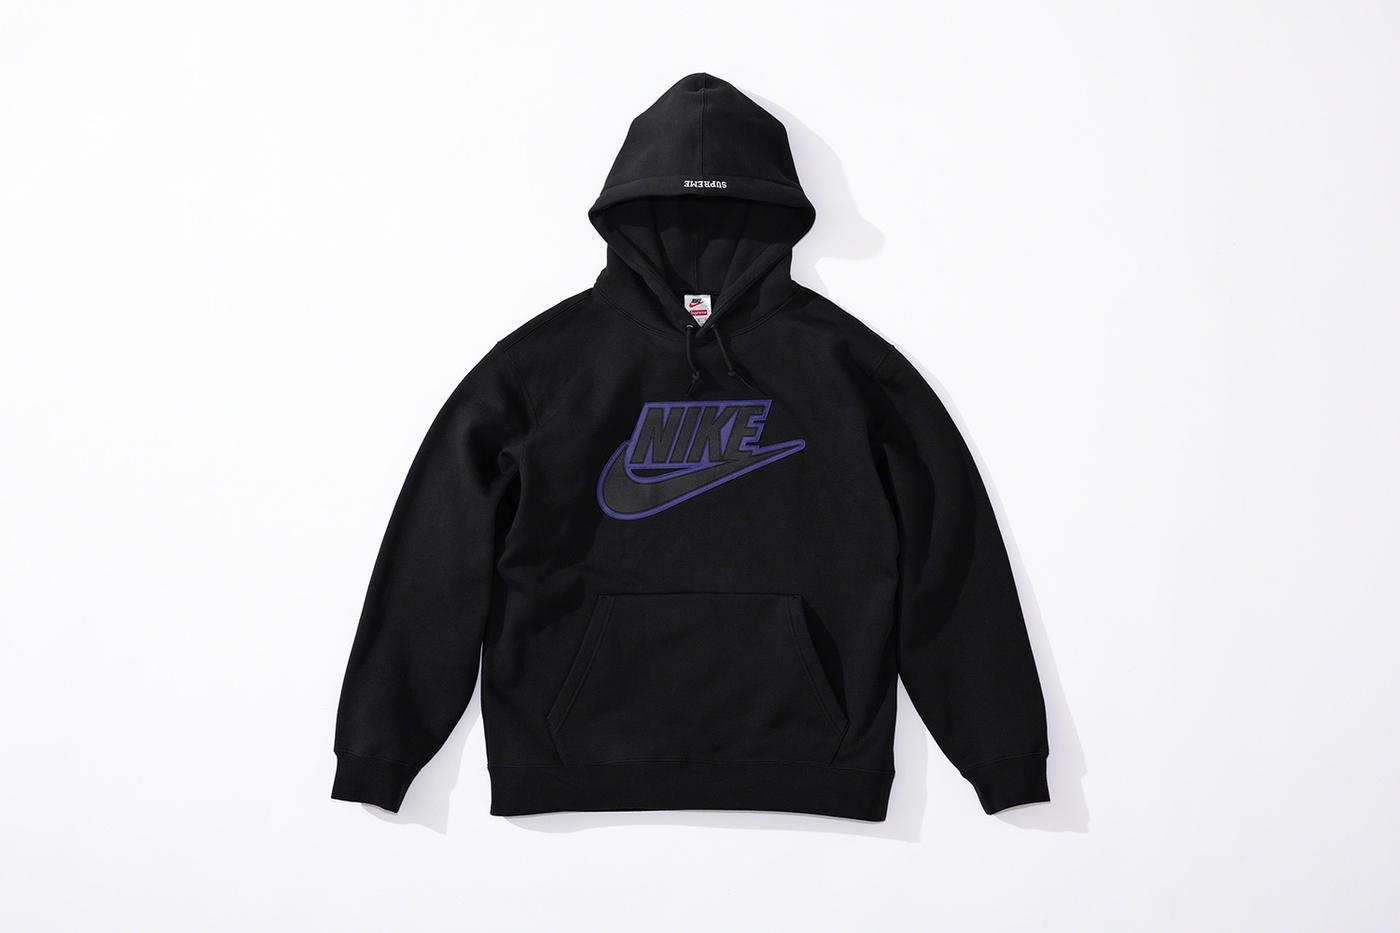 Nike Leather Warm Up Pant - fall winter 2019 - Supreme